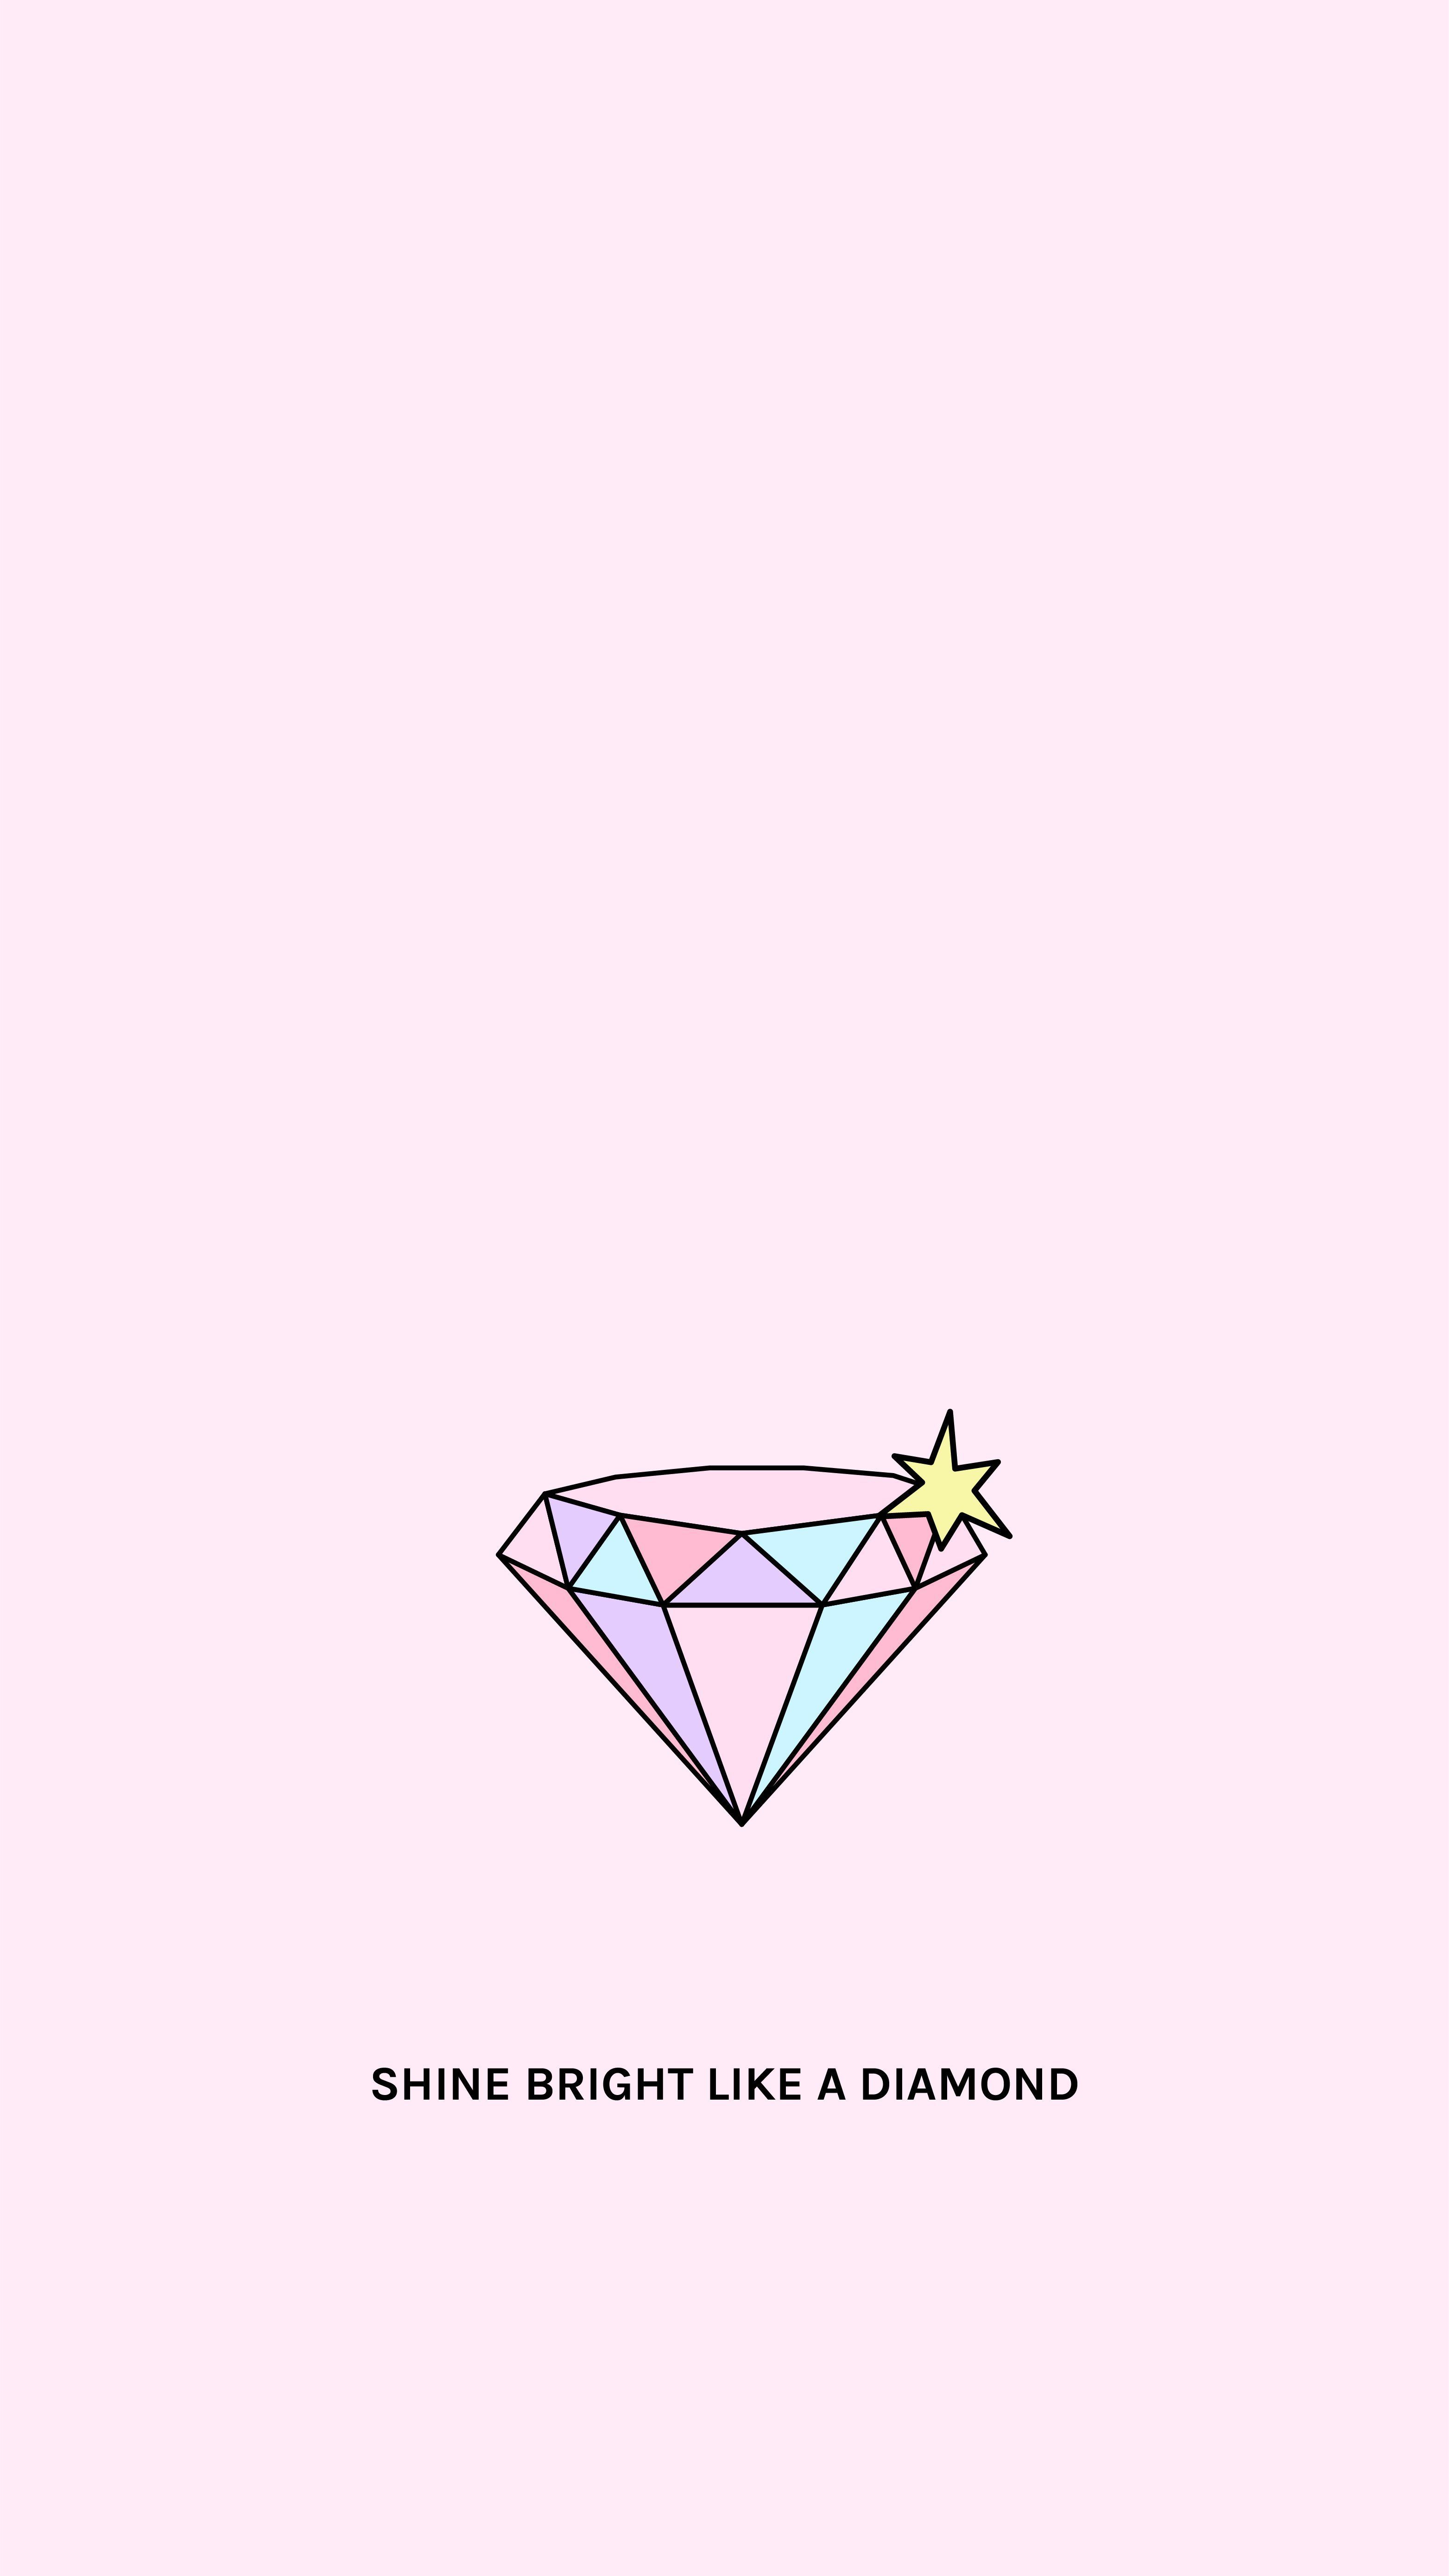 IPhone wallpaper of a pink diamond with the caption 